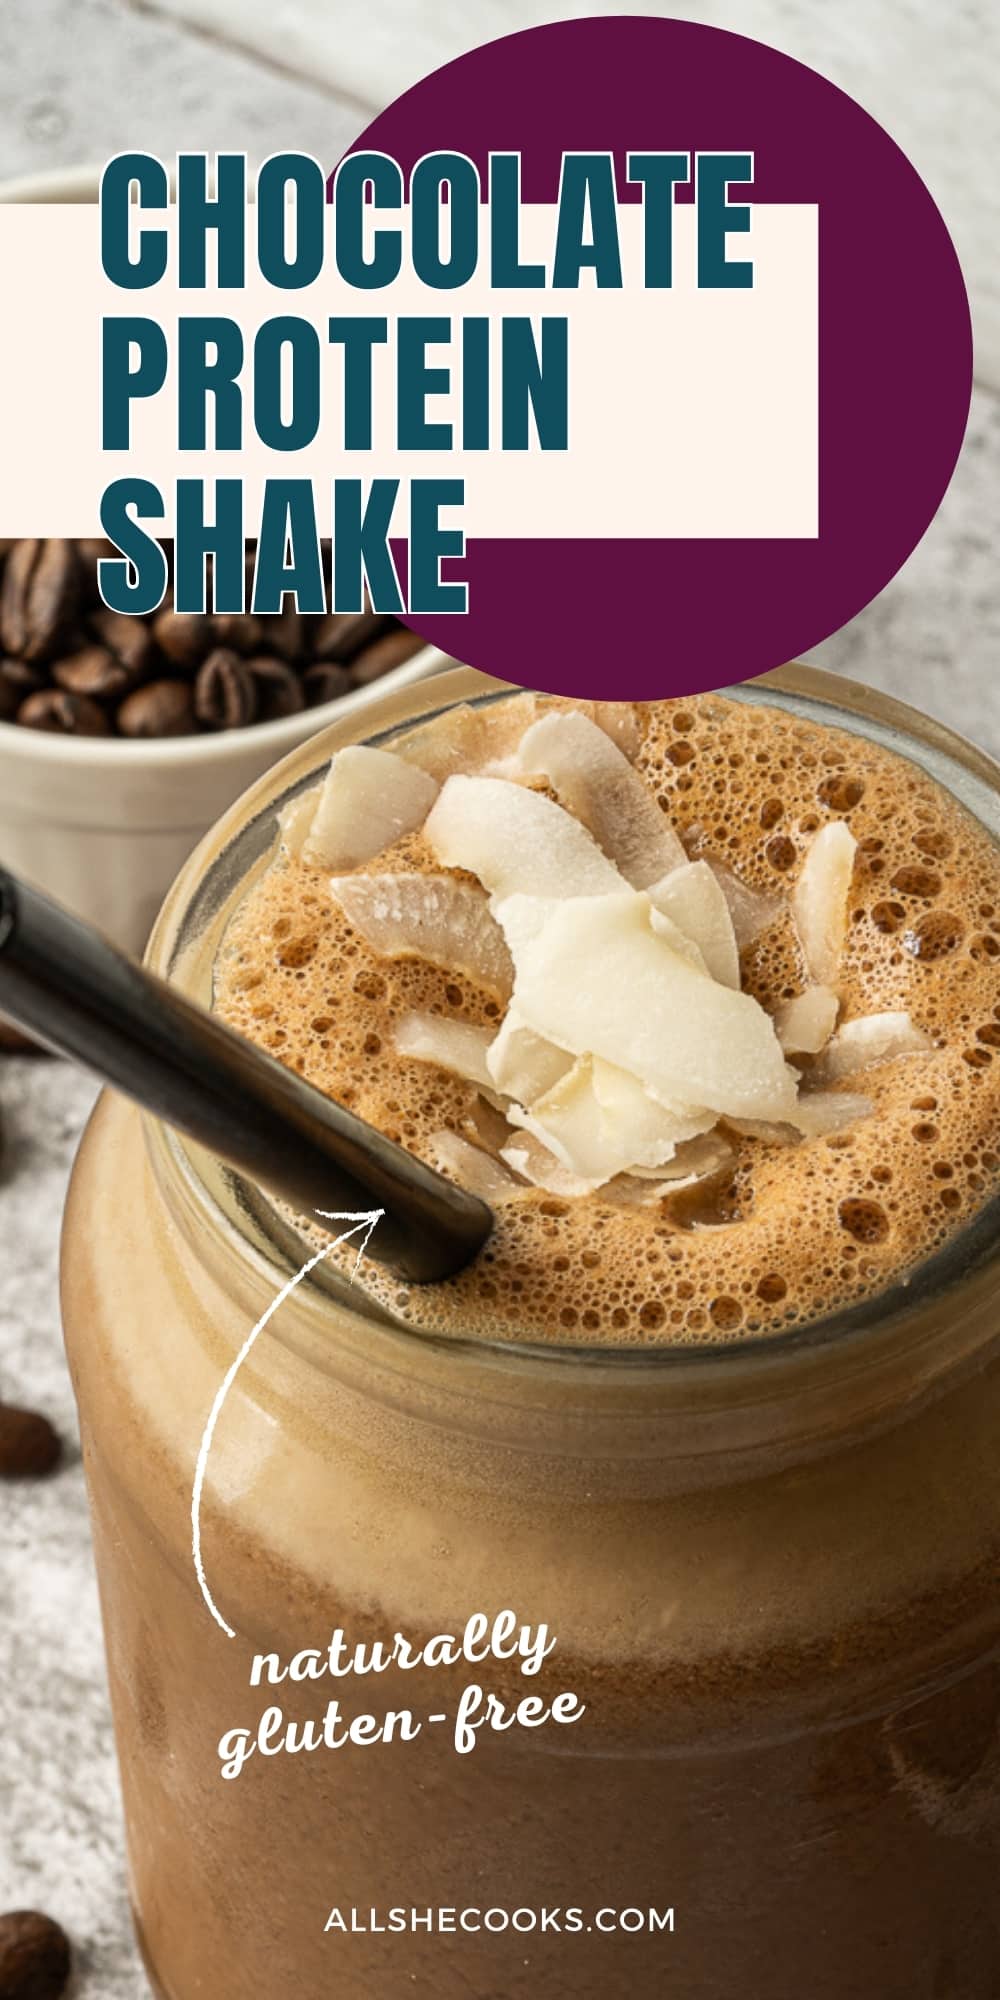 Chocolate Protein Shake - Easy Post-Workout Snack - All She Cooks